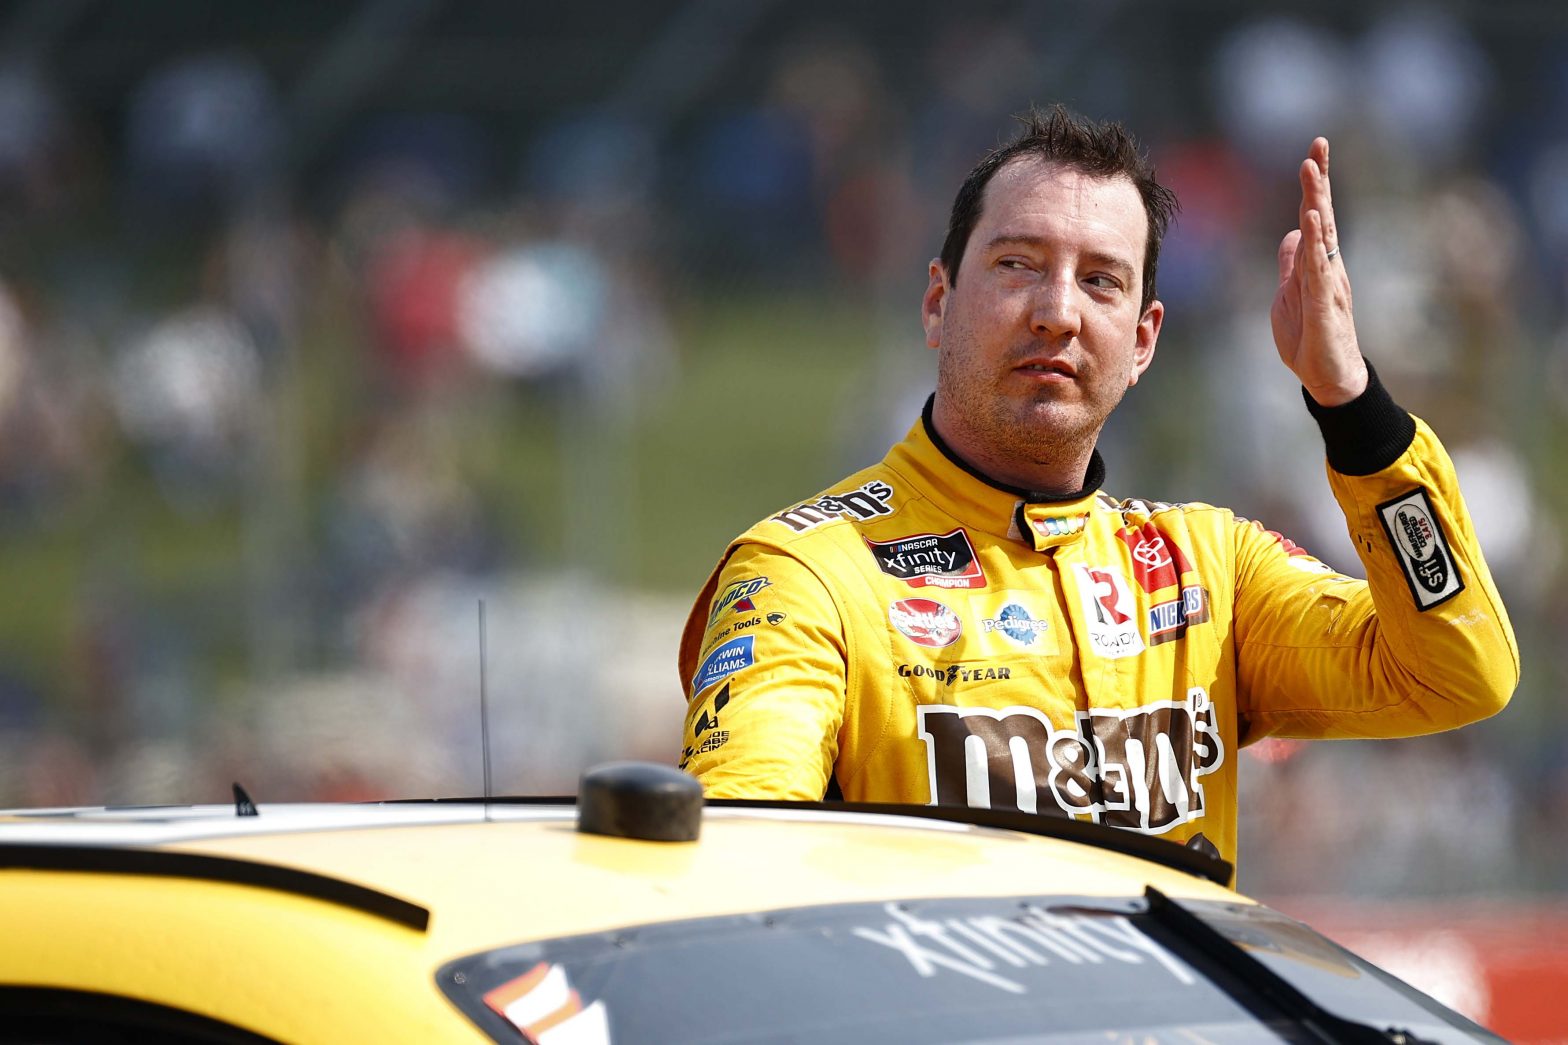 Kyle Busch age, net worth, wife Samantha, children and legal issues